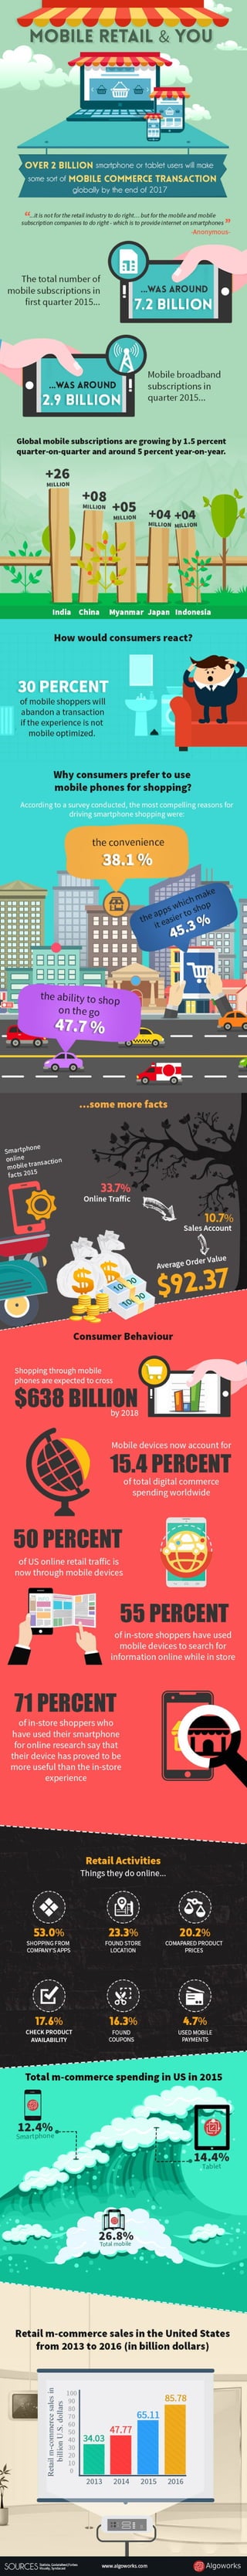 Mobile Retail and You | An Infographic